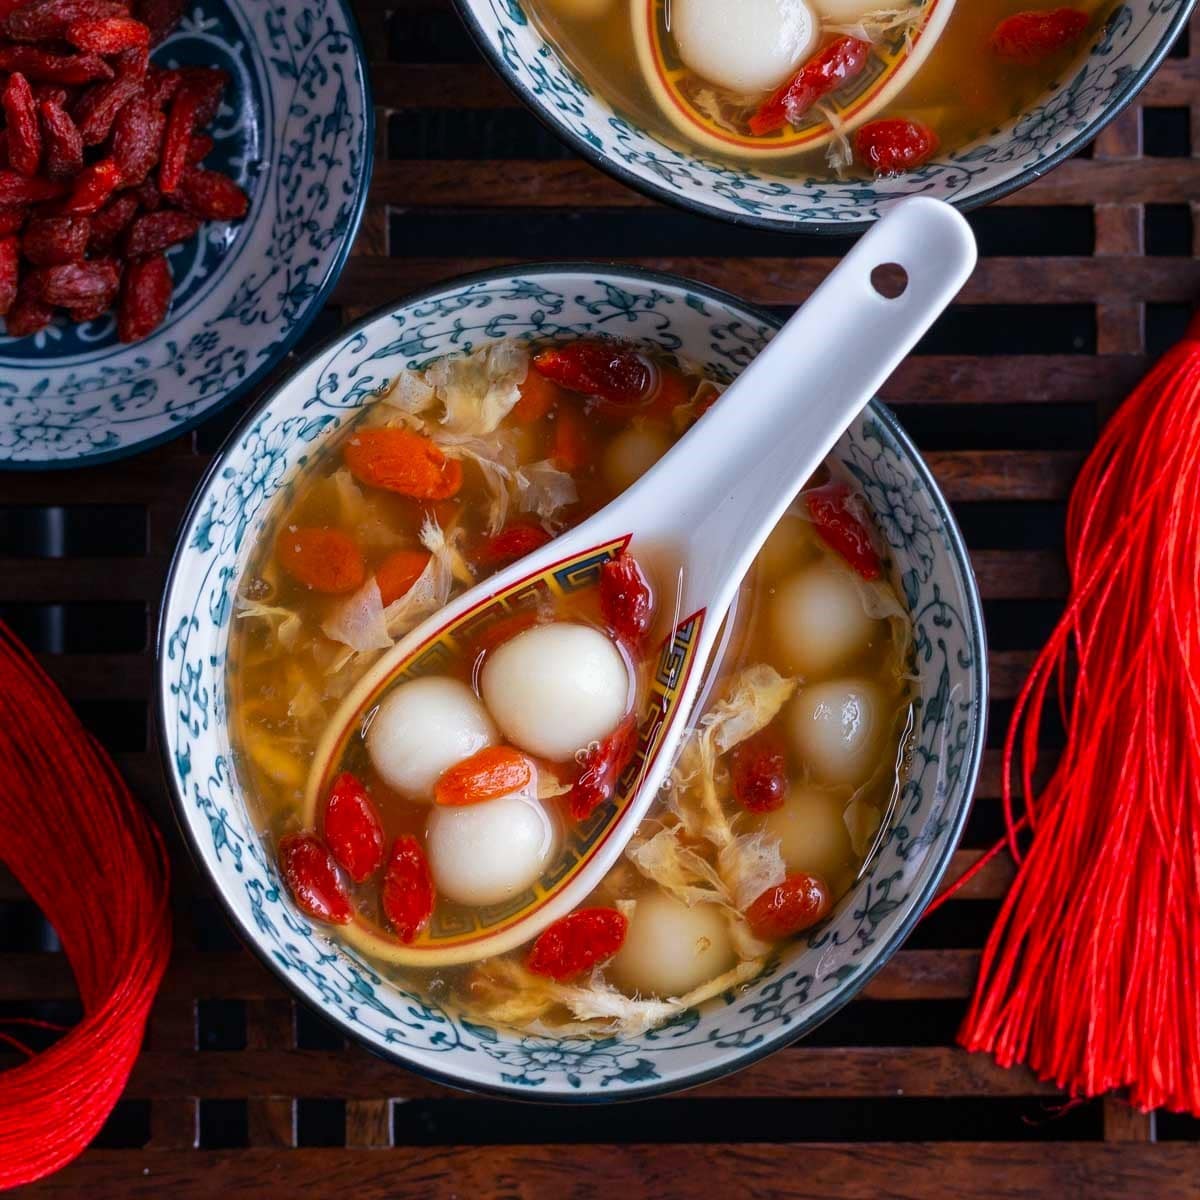 Make extra soup, then ladle it into red Solo cups to freeze. Grab